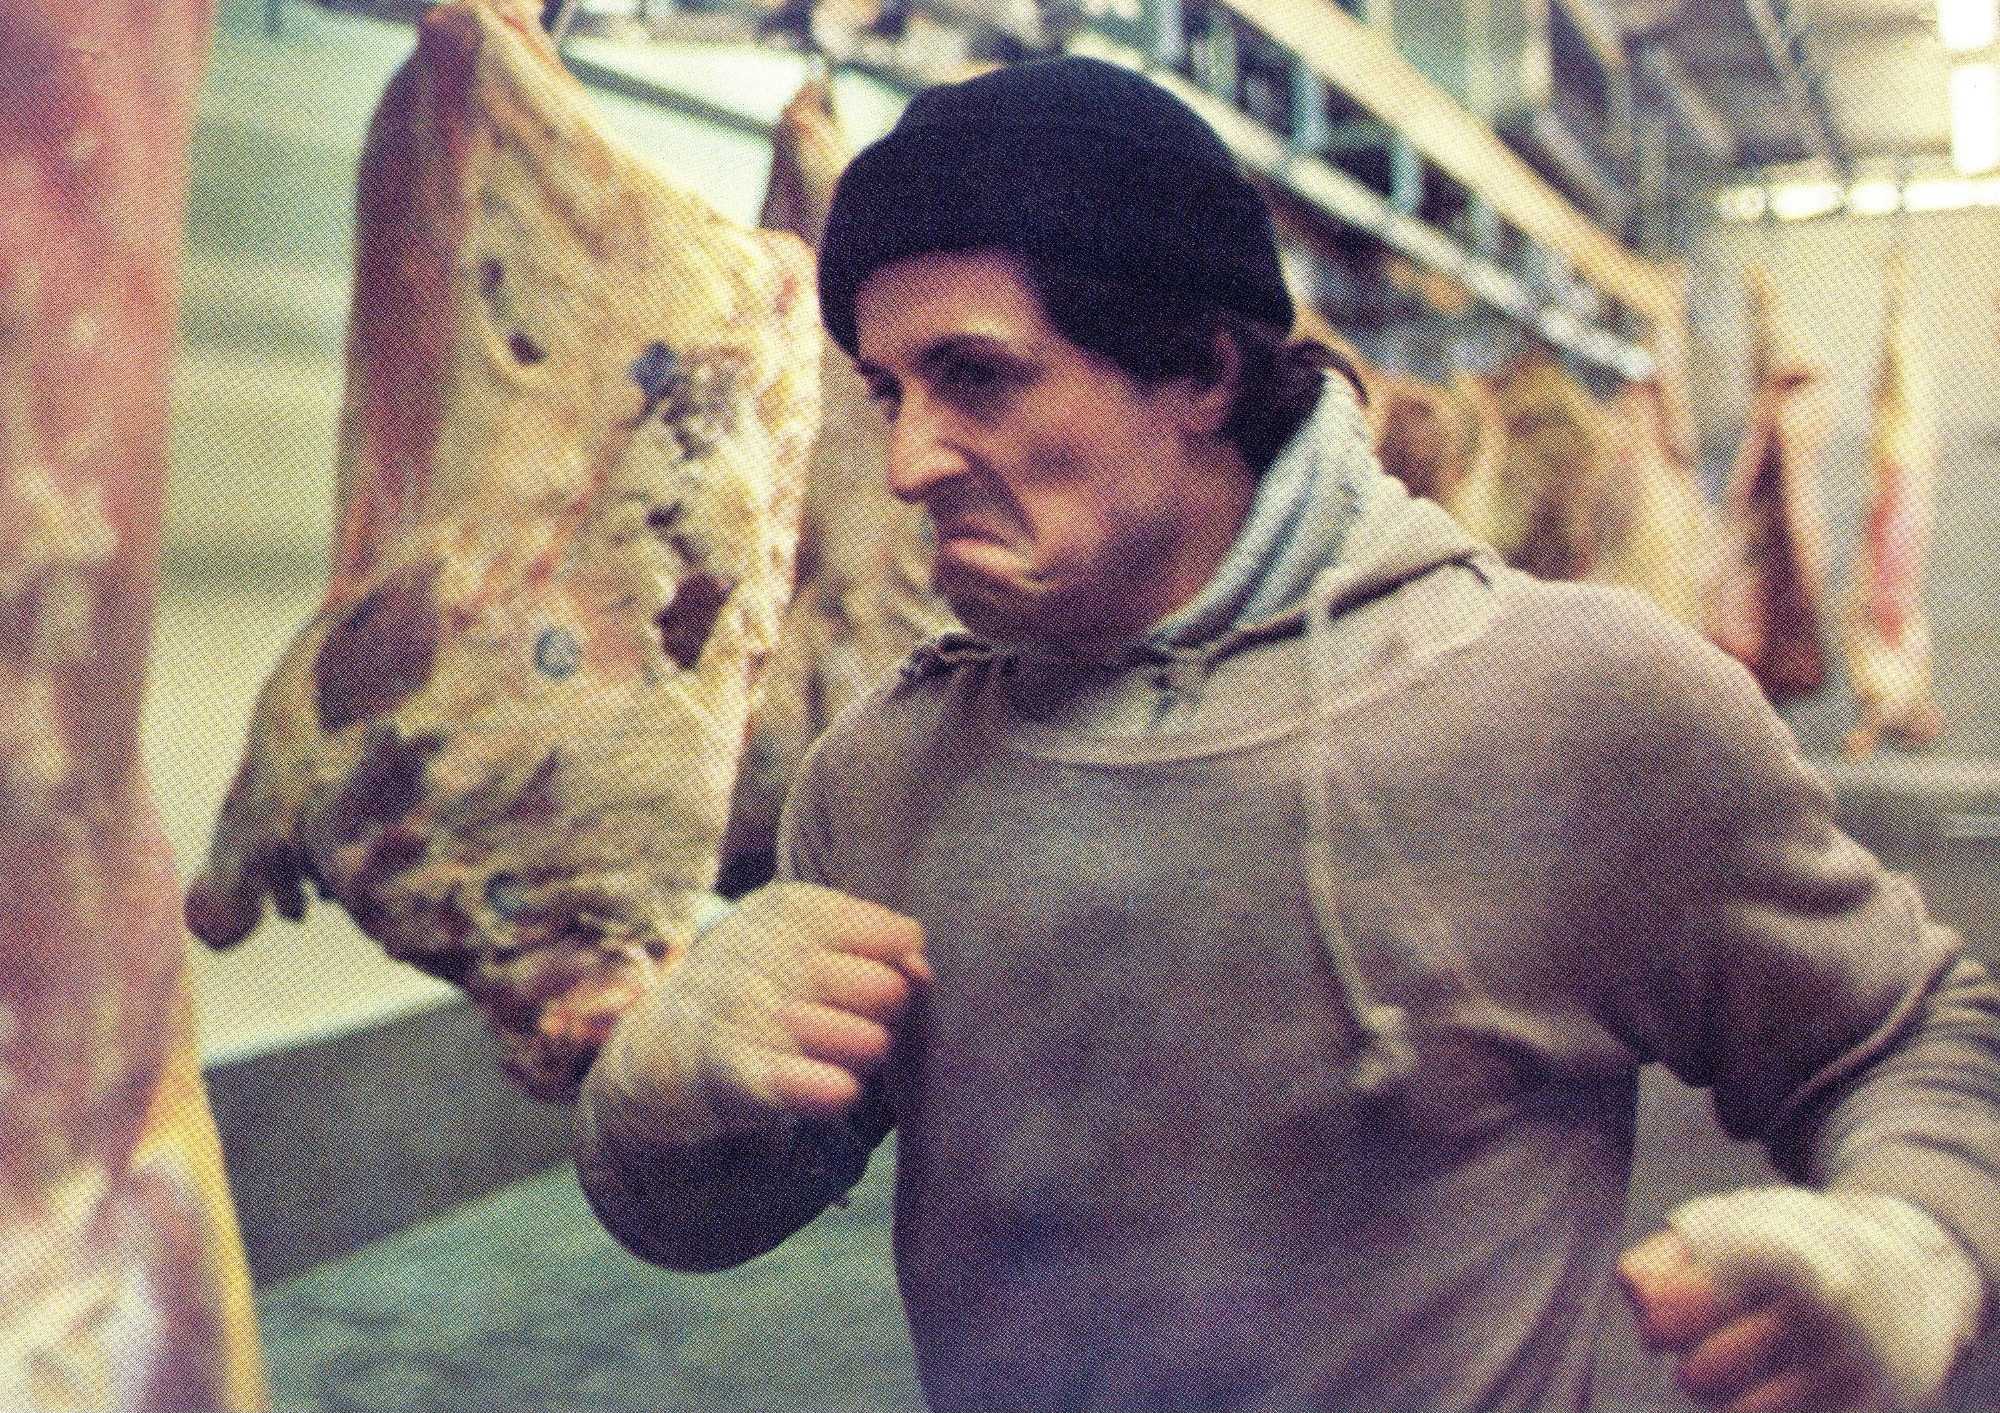 Sylvester Stallone beats up frozen meat in a slaughterhouse